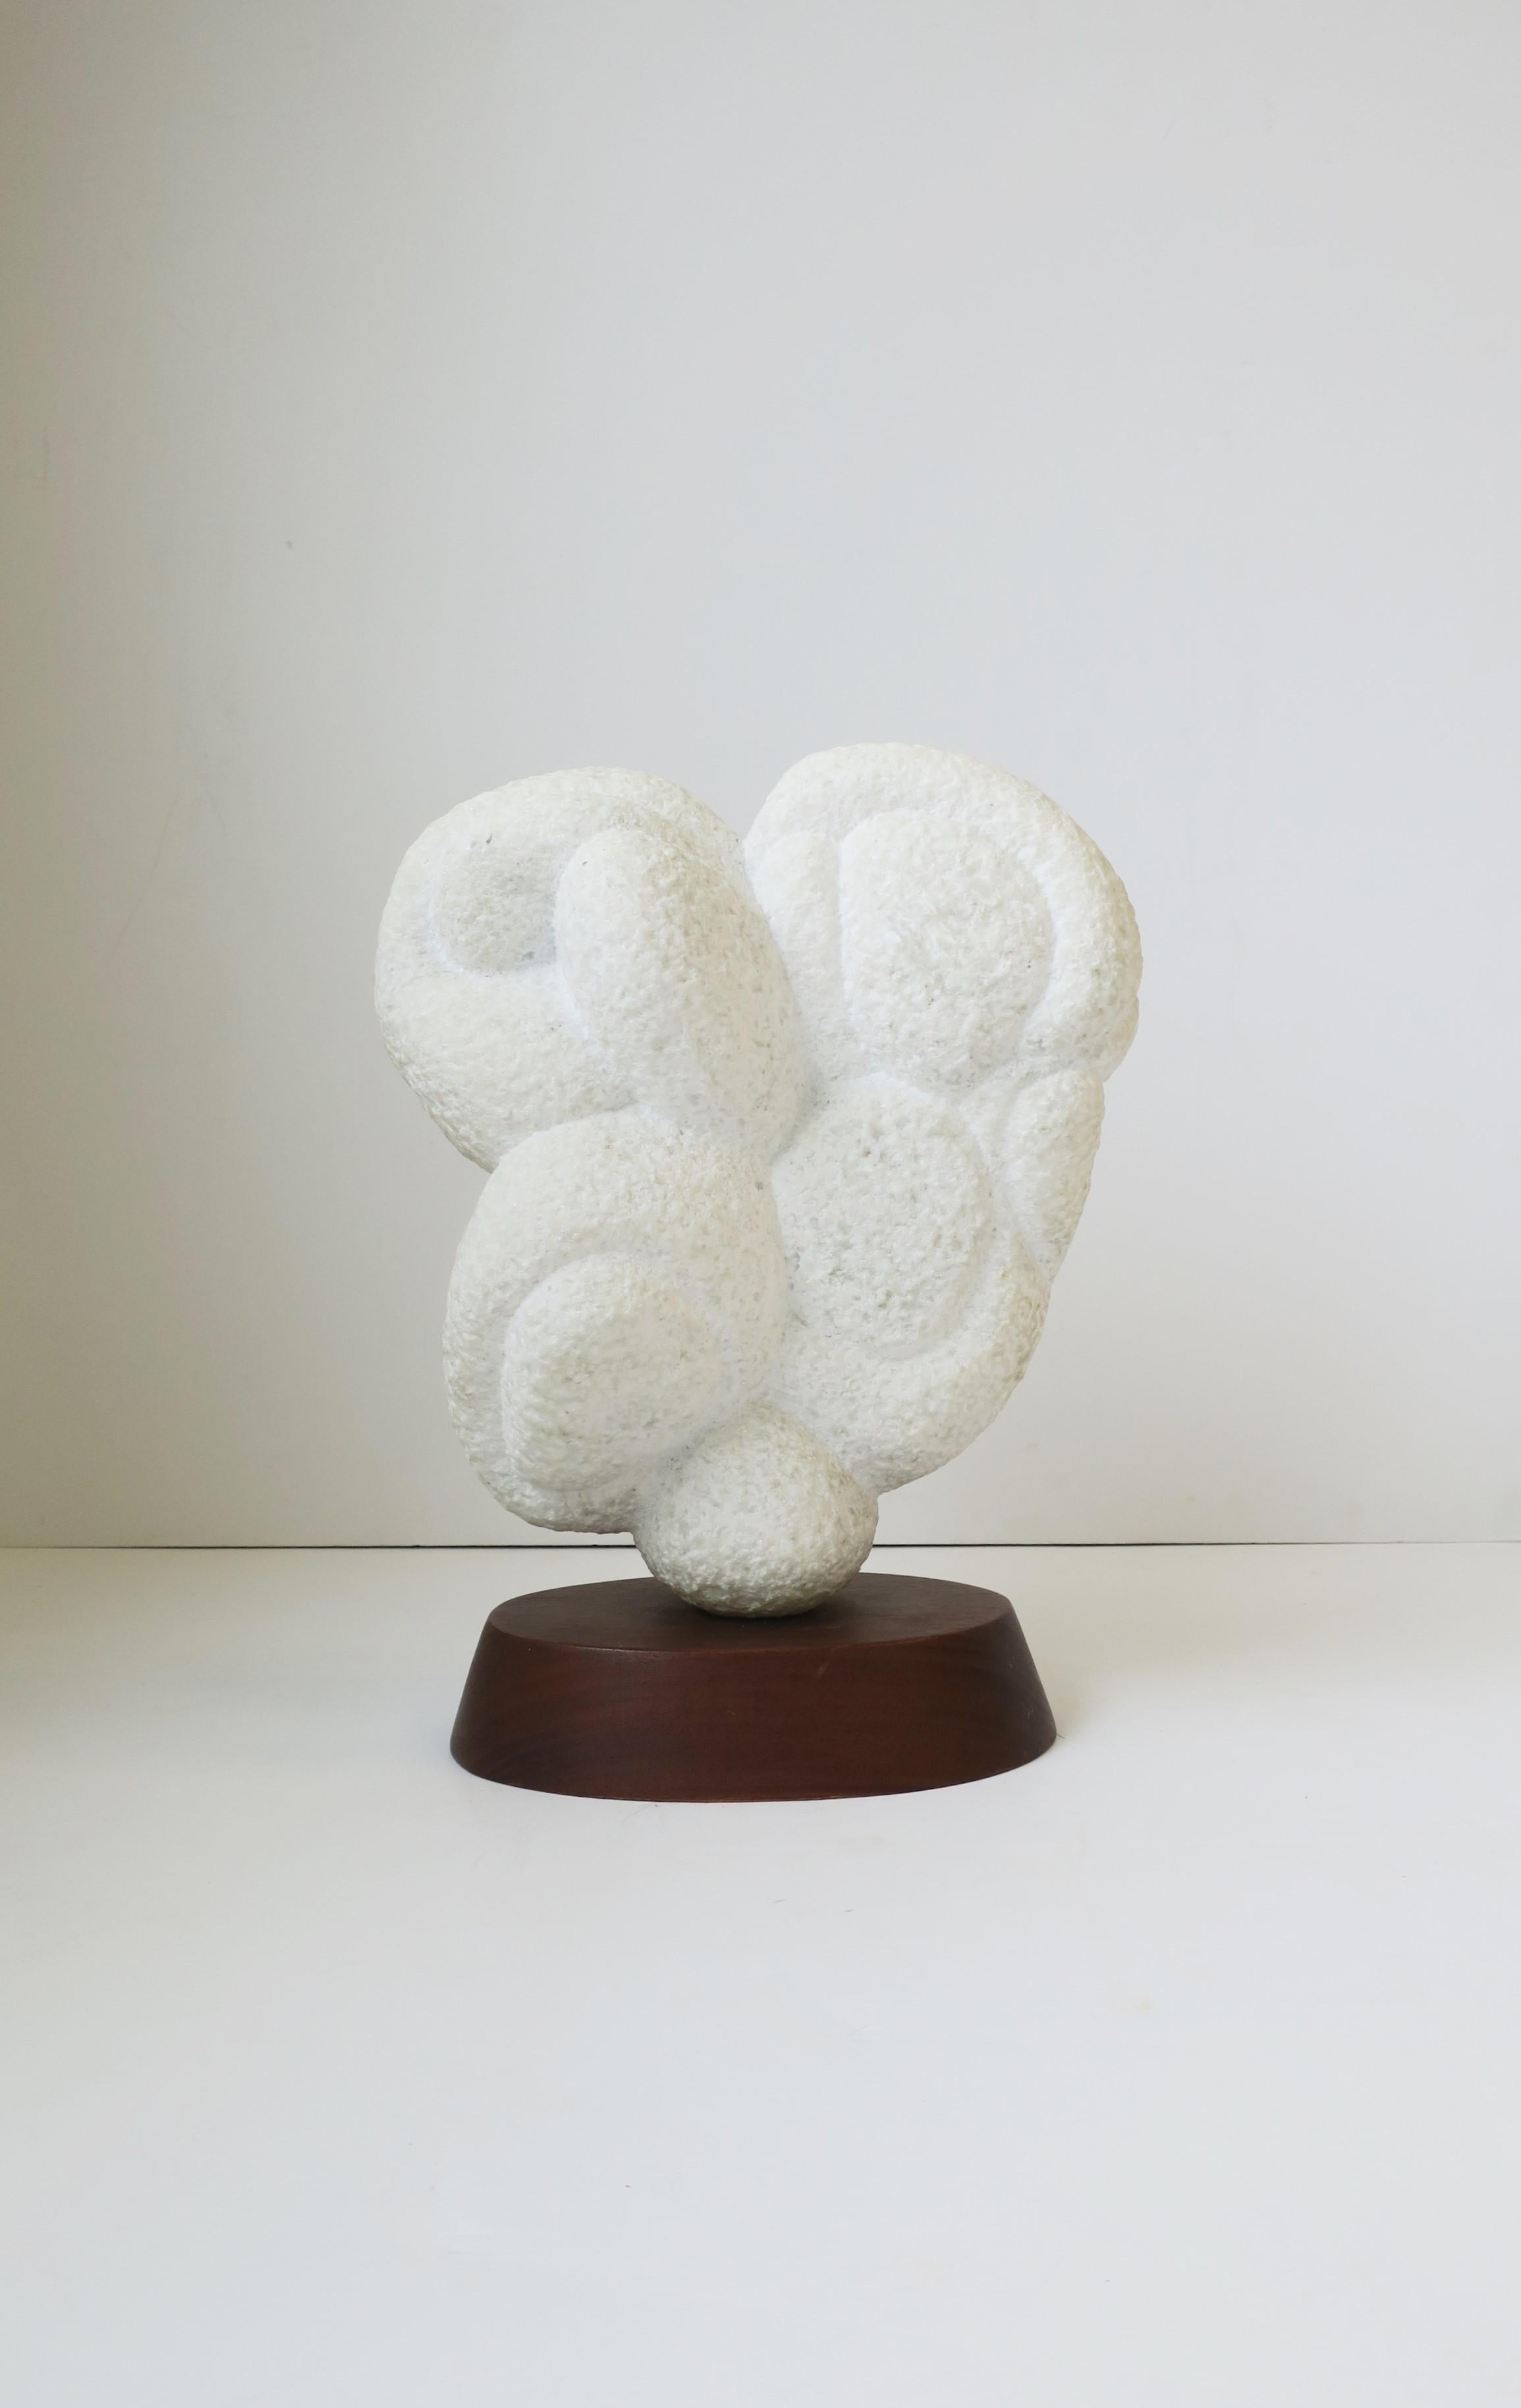 Carved White Granite Marble Abstract Sculpture on Wood Base